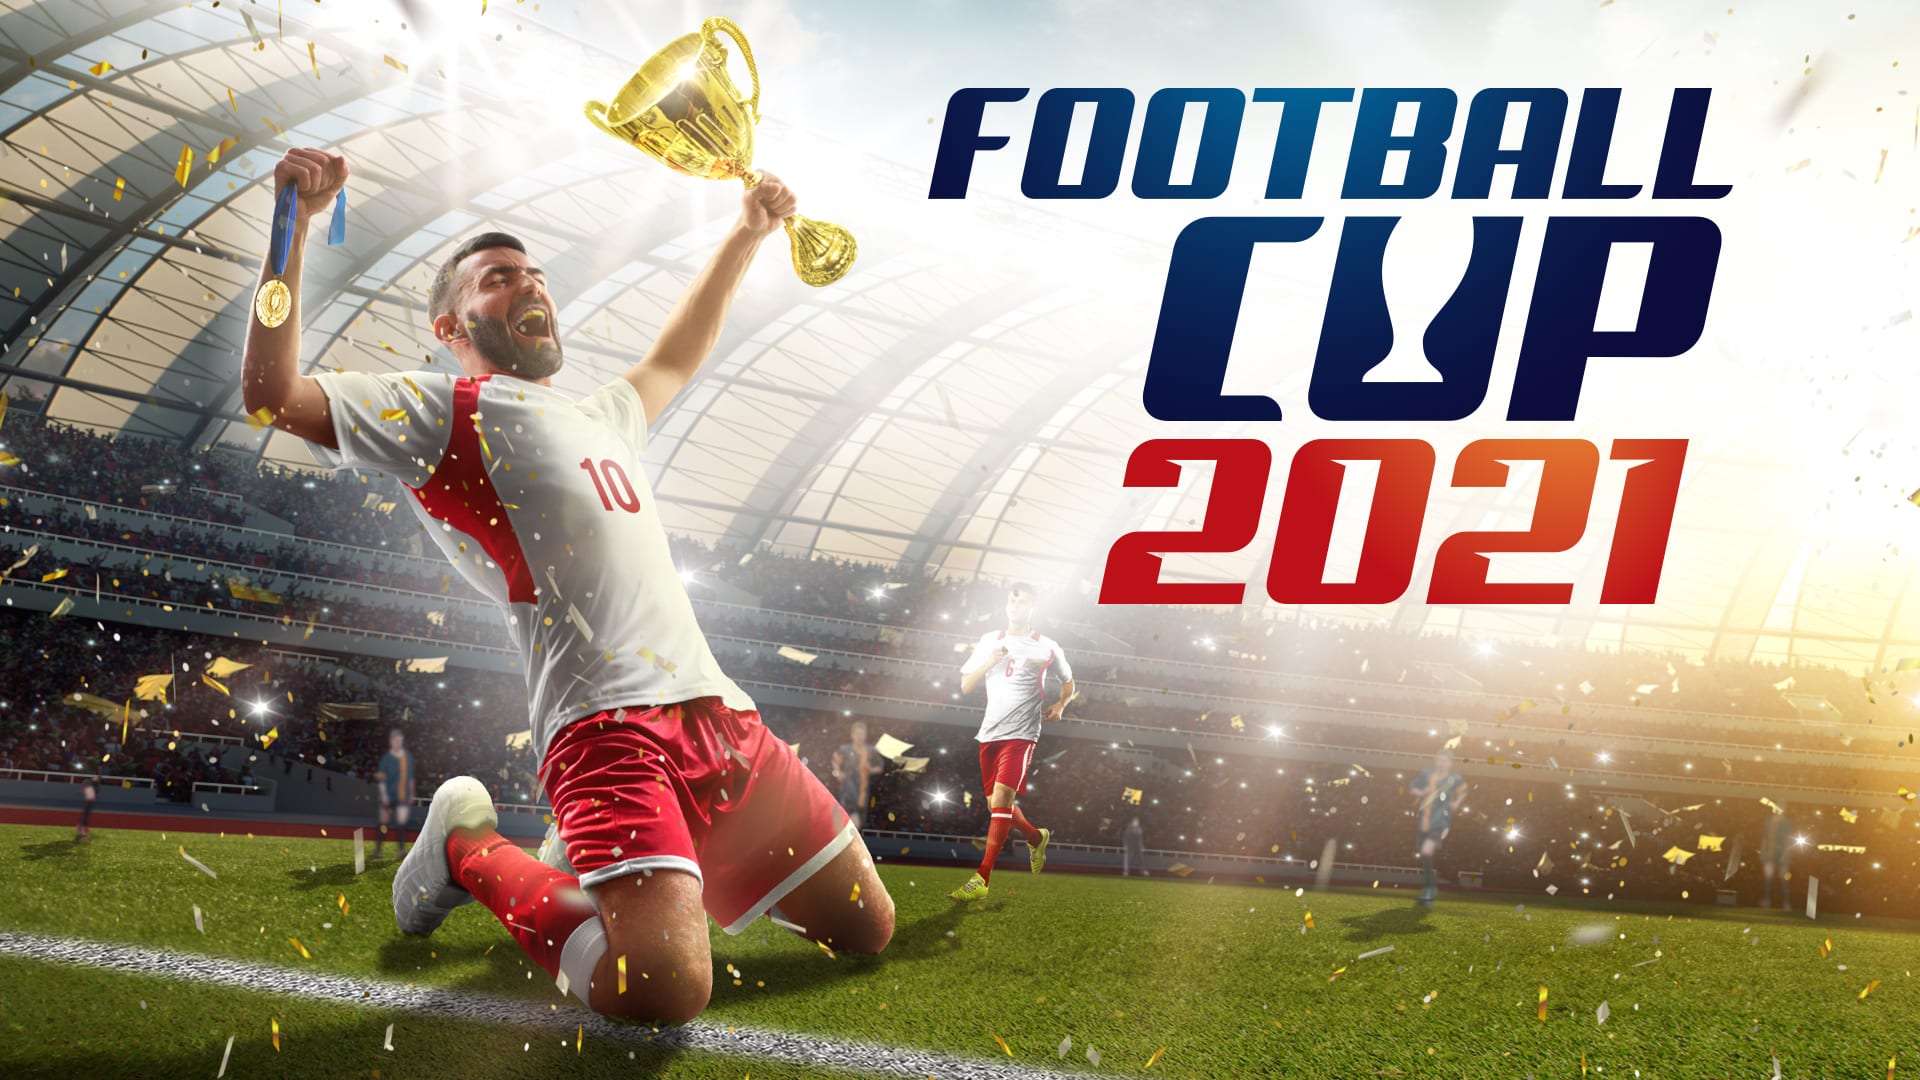 Football Cup 2021 1